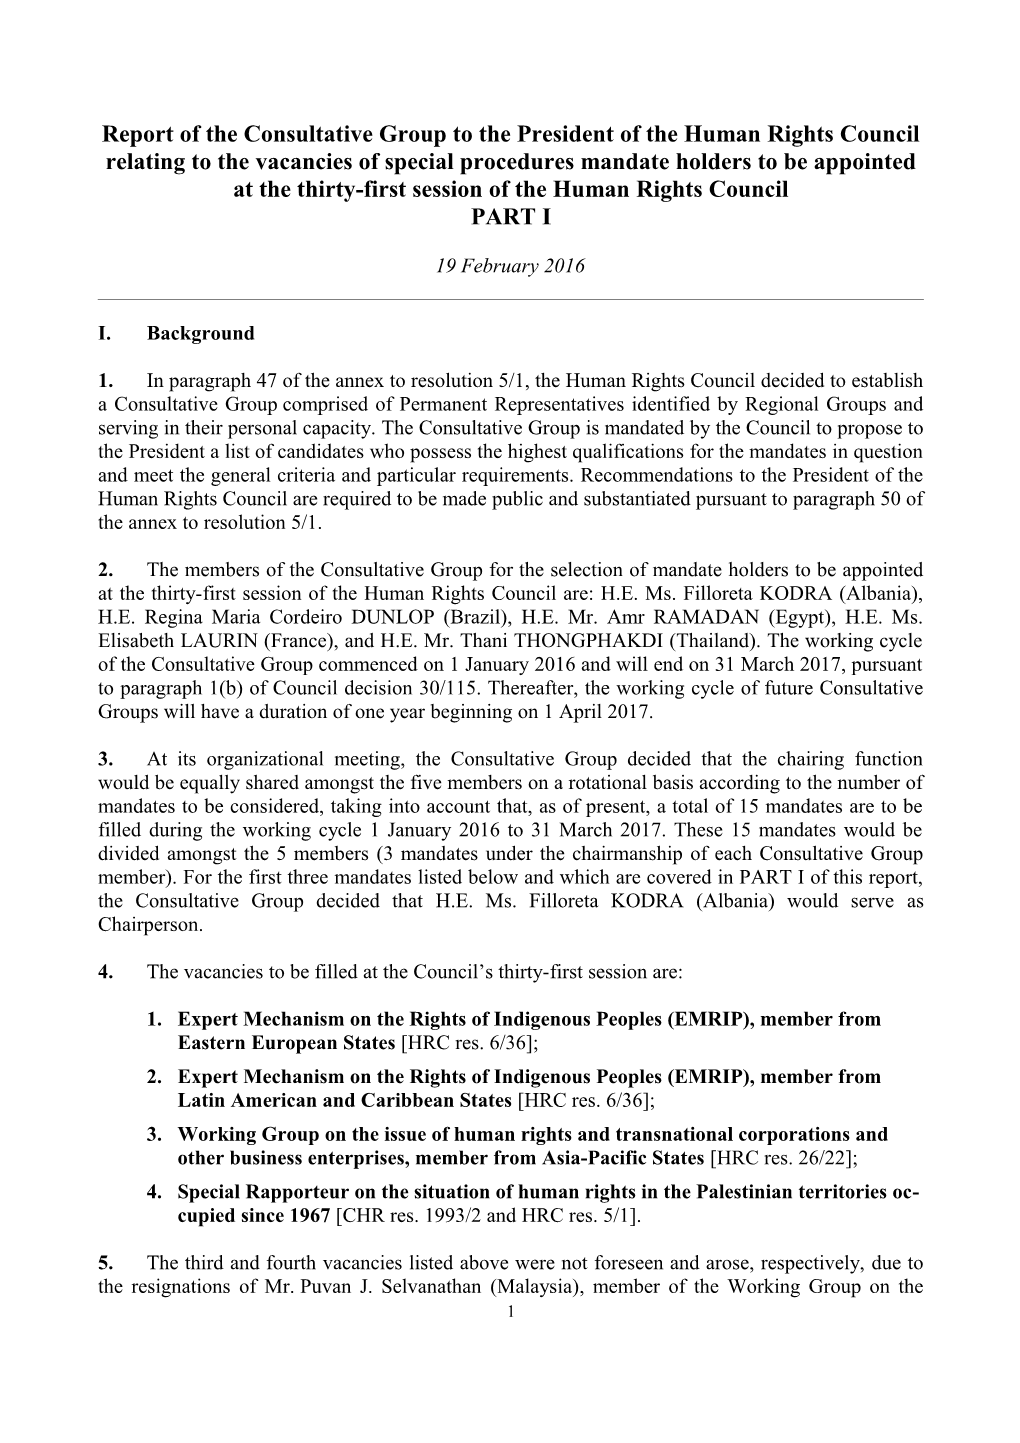 Report of the Consultative Group to the President of the Human Rights Council Relating s1